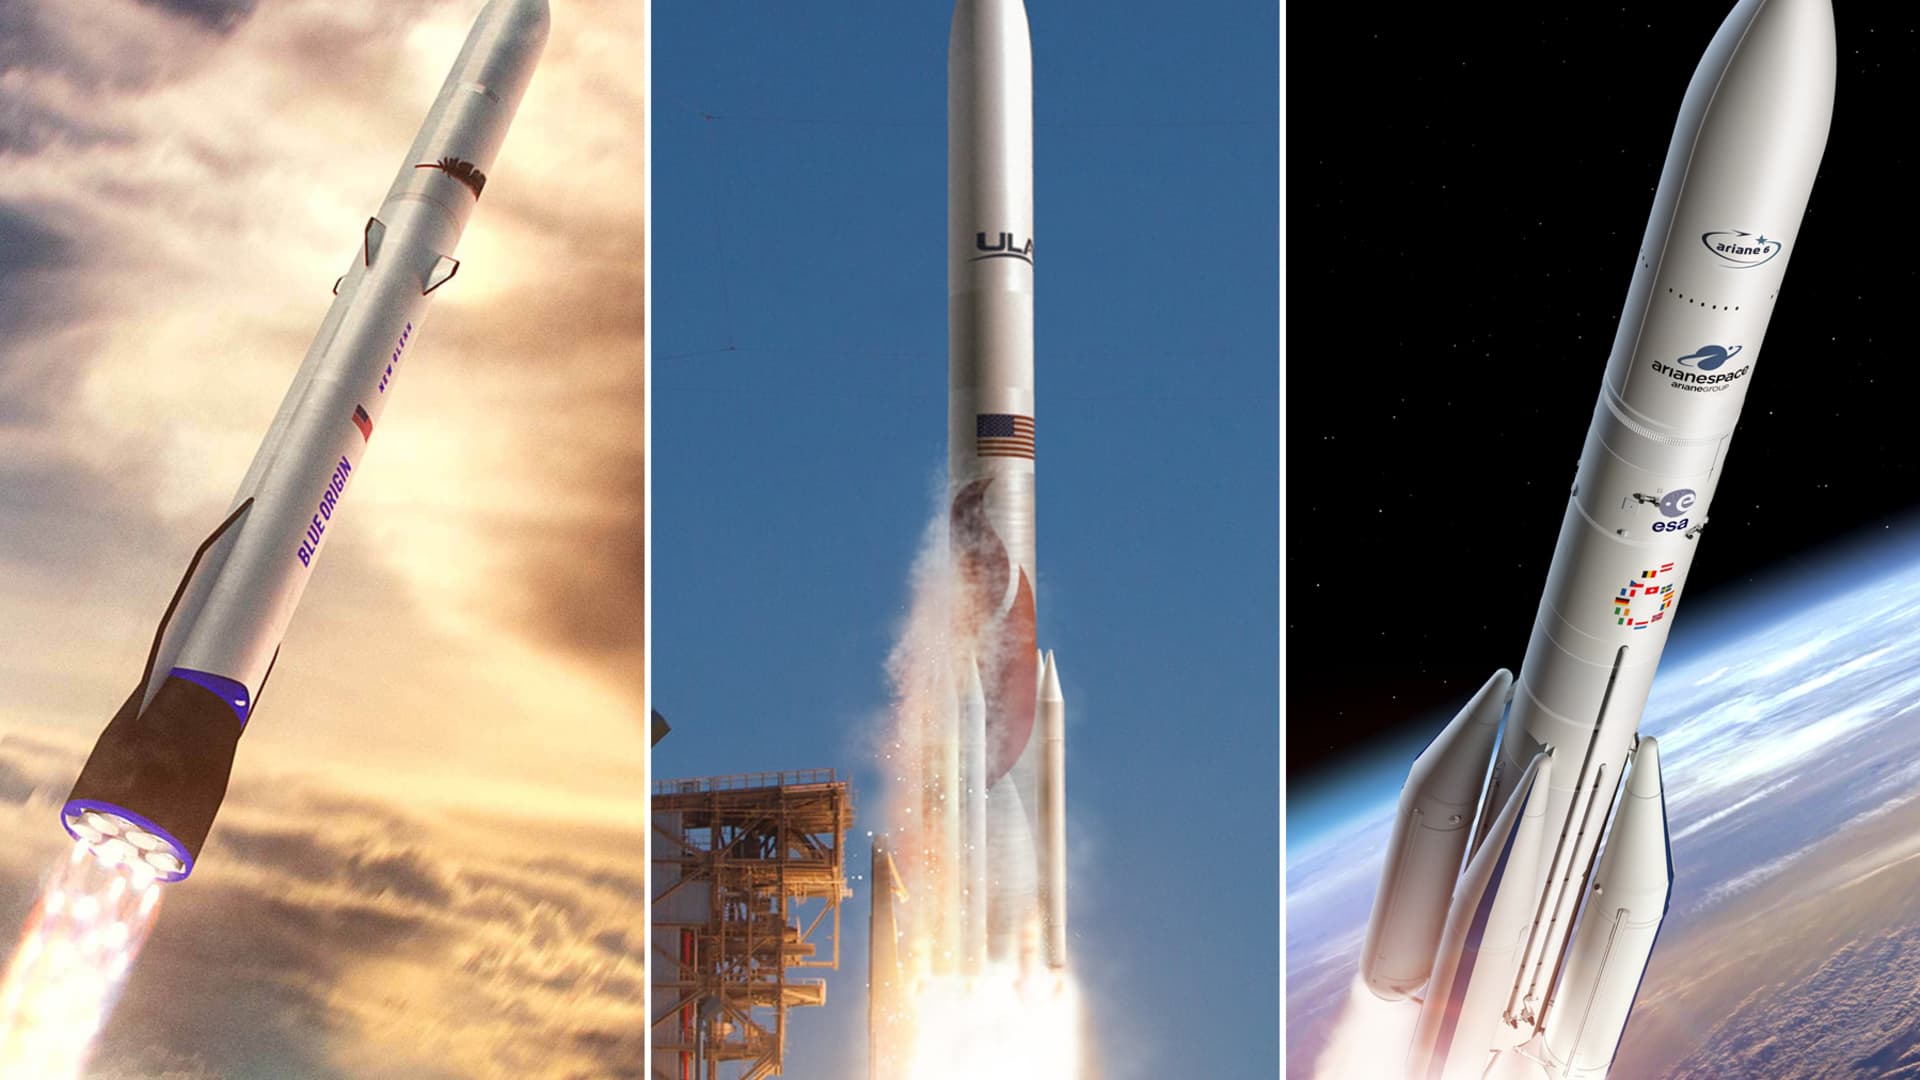 Amazon signs massive rocket deal with 3 firms, including Bezos’ Blue Origin, to launch internet satellites